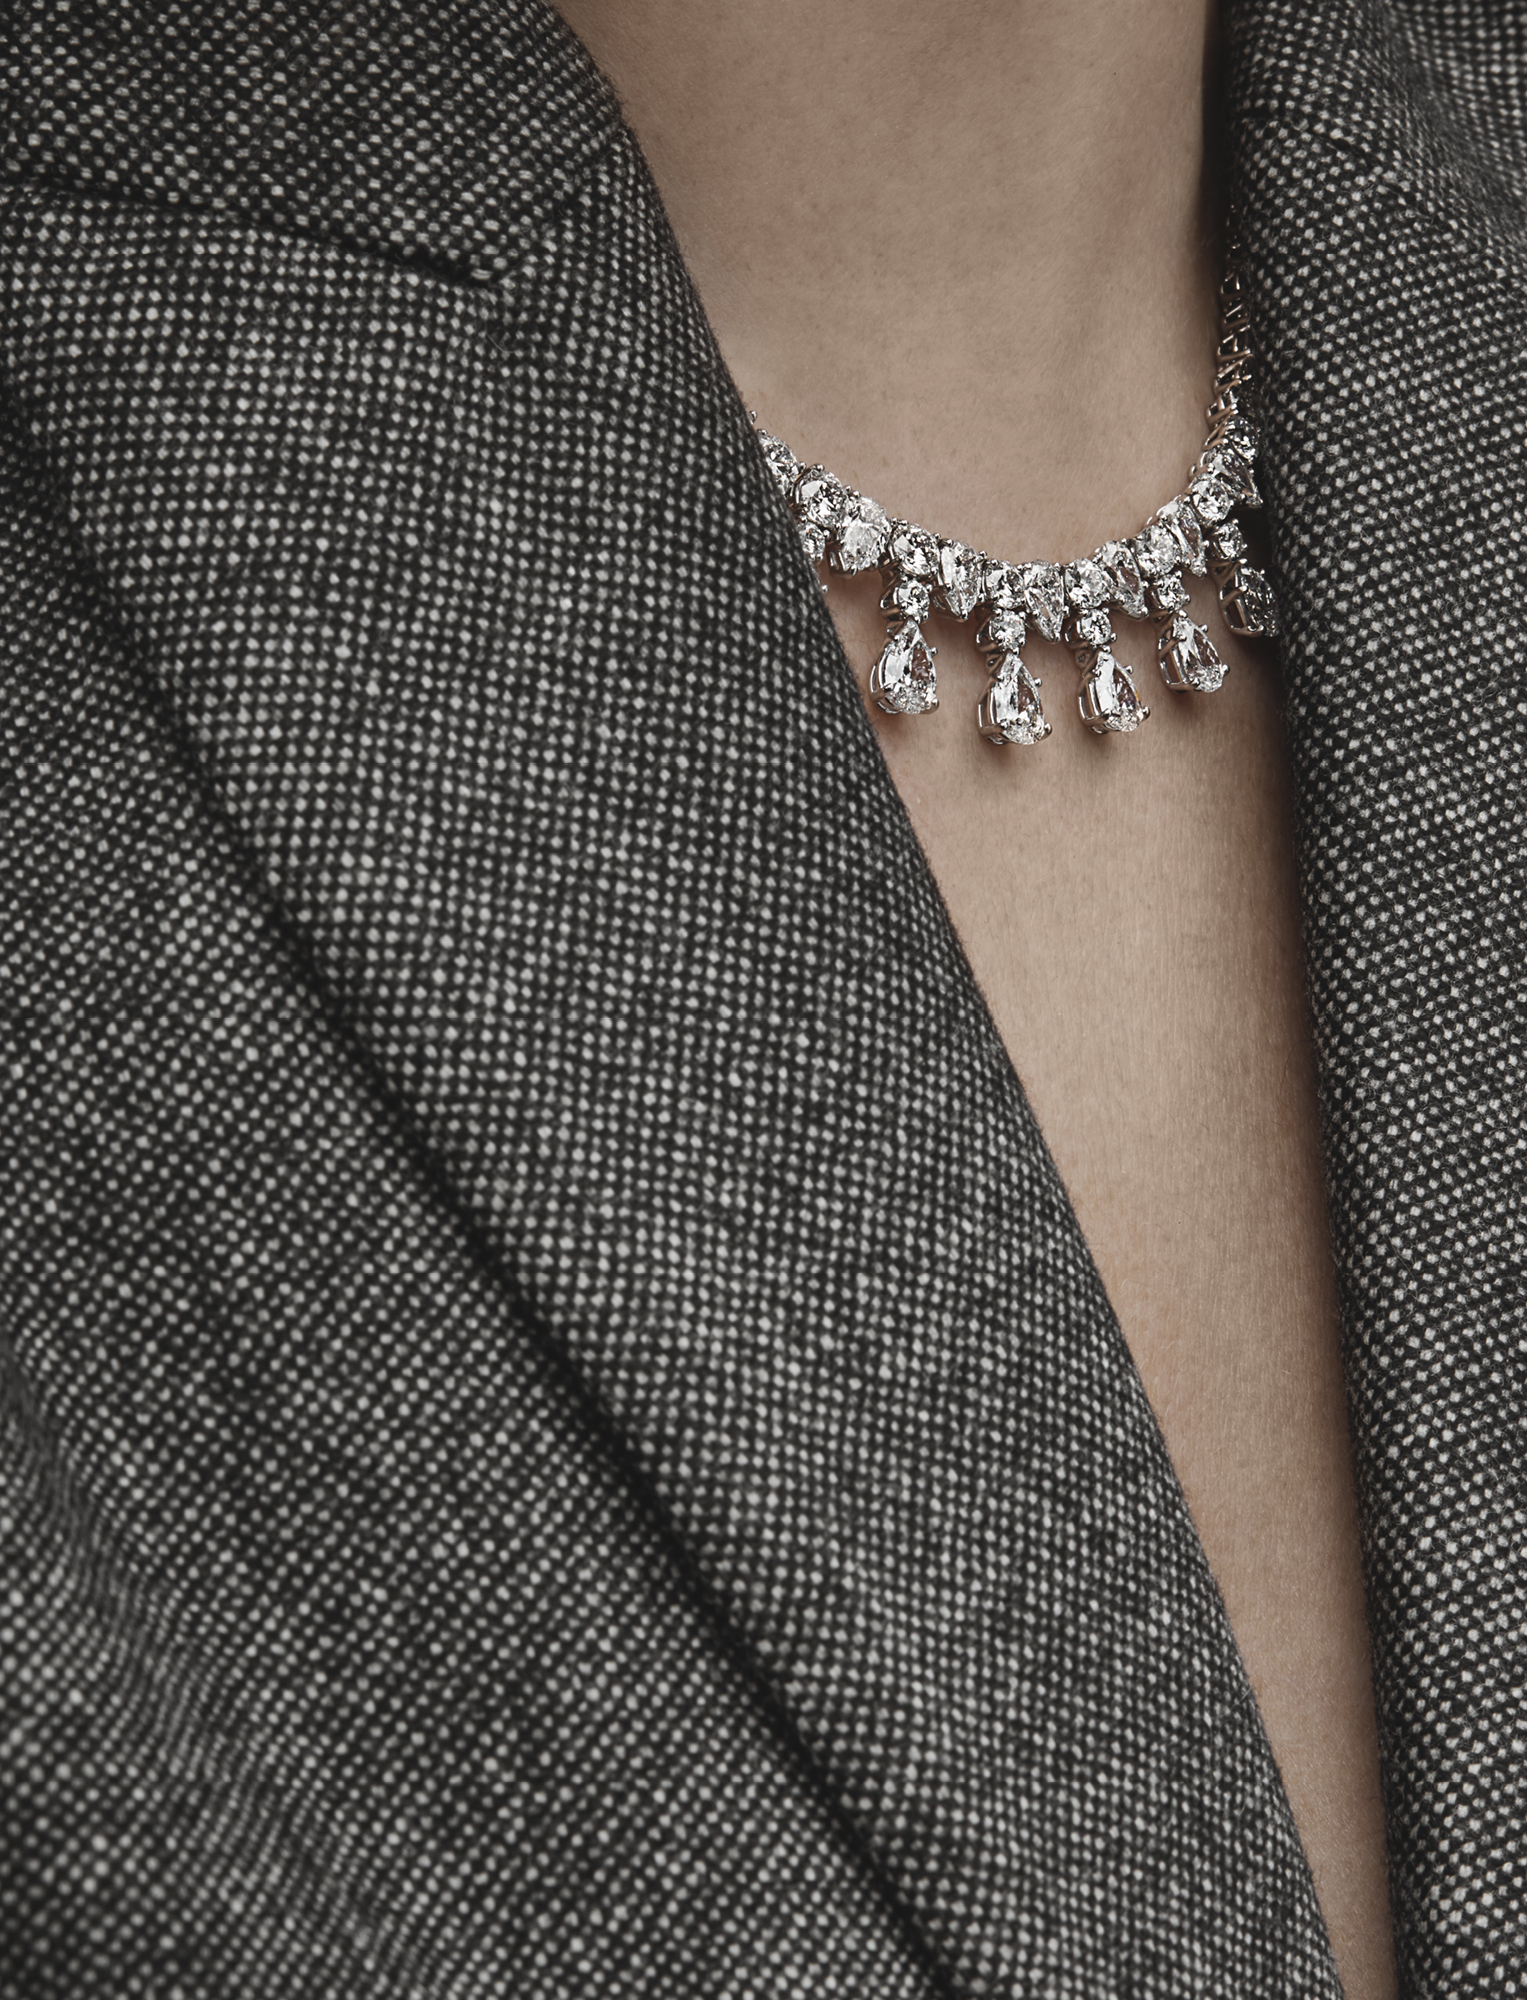 Double breasted grey wool jacket, £2,460, BRUNELLO CUCINELLI; Necklace, POA, HARRY WINSTON